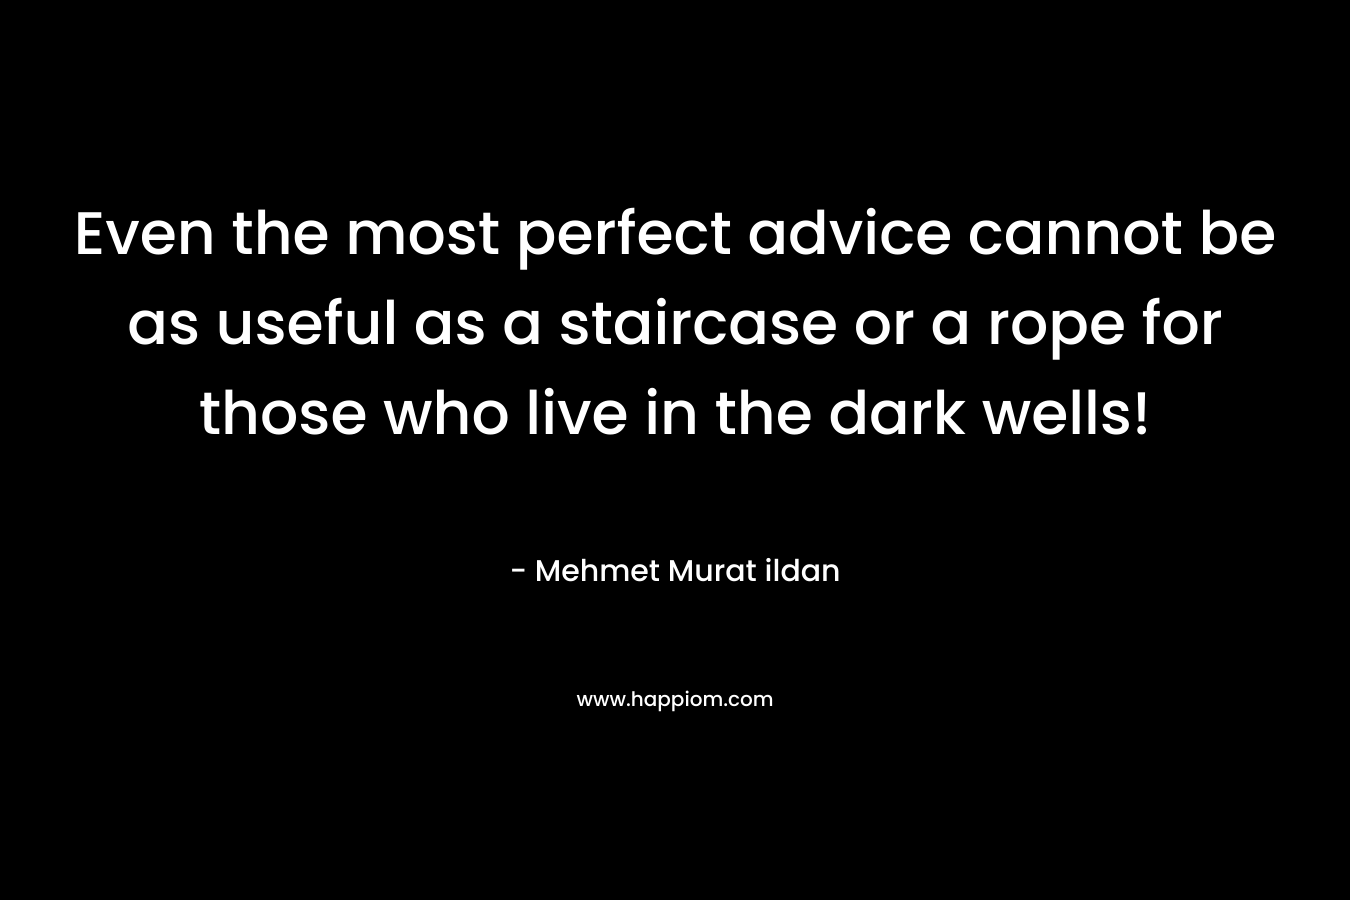 Even the most perfect advice cannot be as useful as a staircase or a rope for those who live in the dark wells! – Mehmet Murat ildan